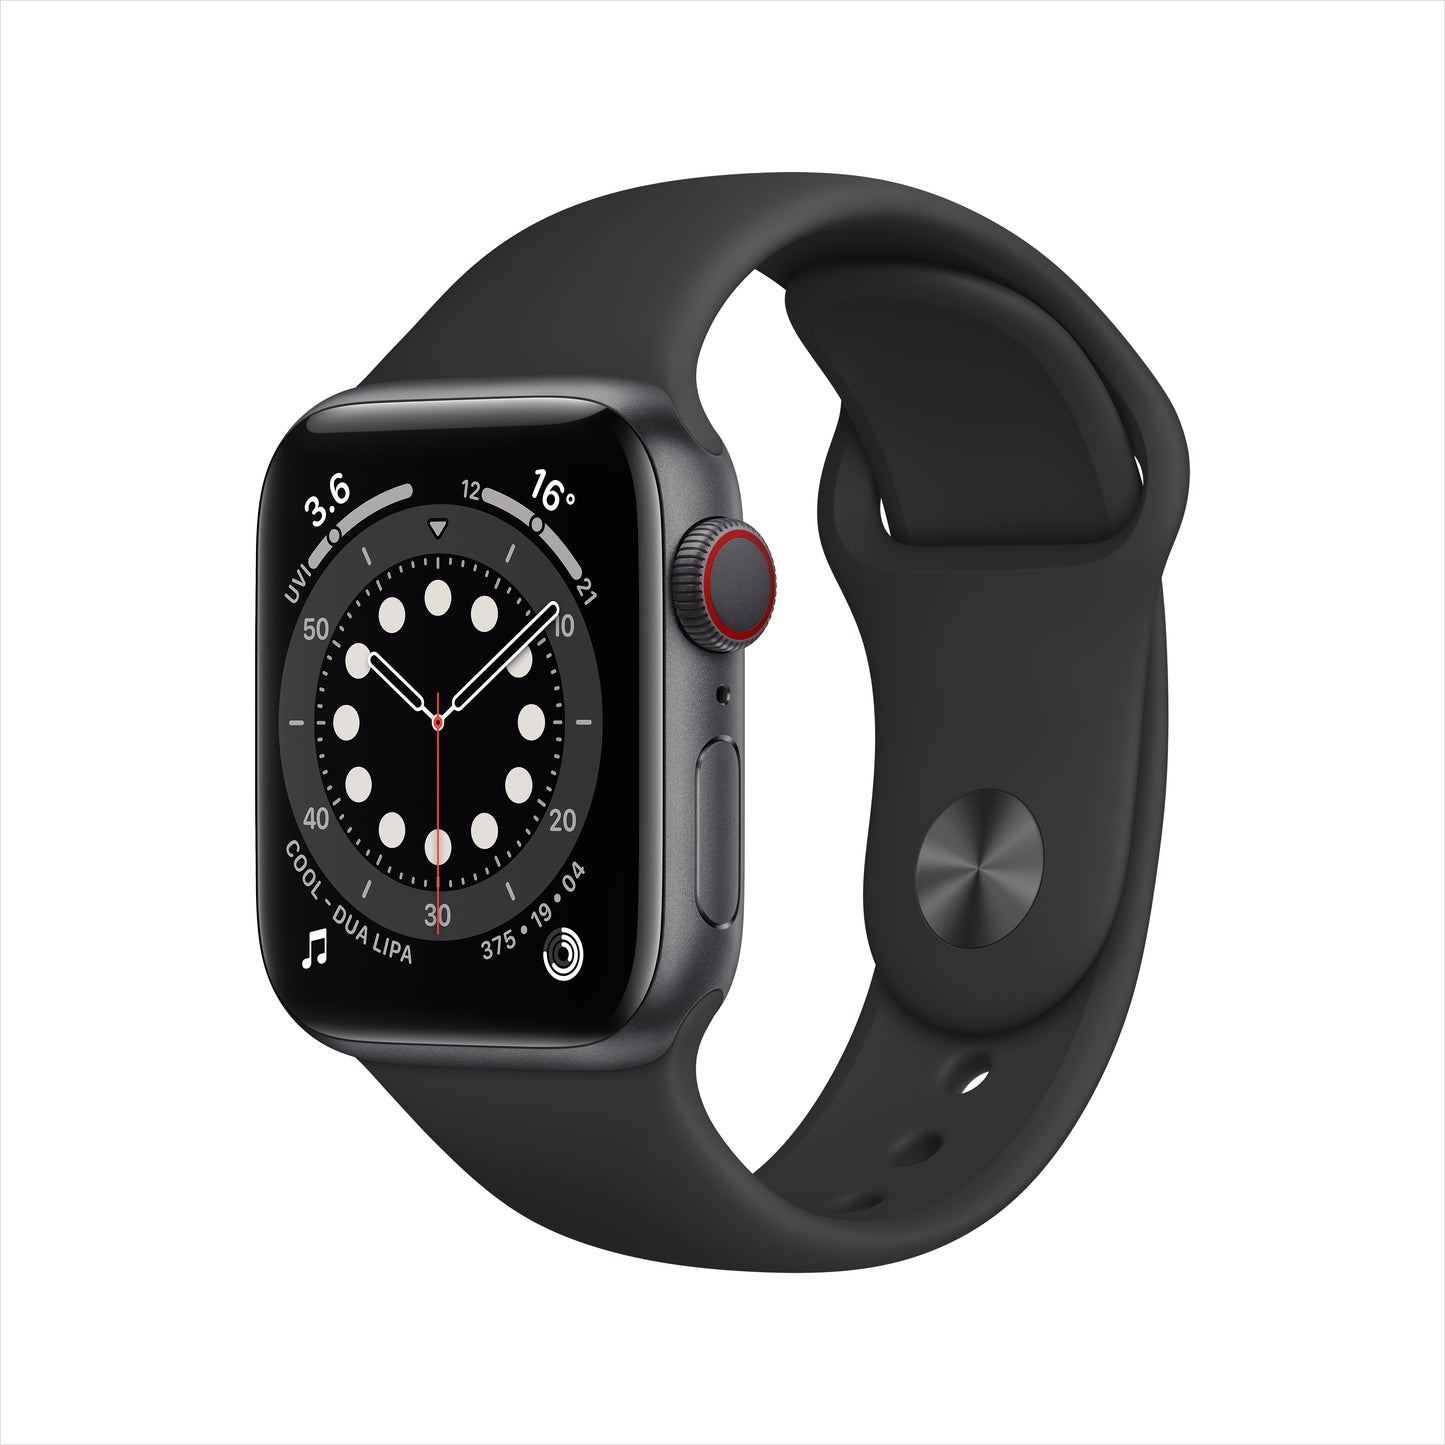 Apple Watch Series 6 Cellular 40mm Space Grey Aluminium Case with Black Sport Band